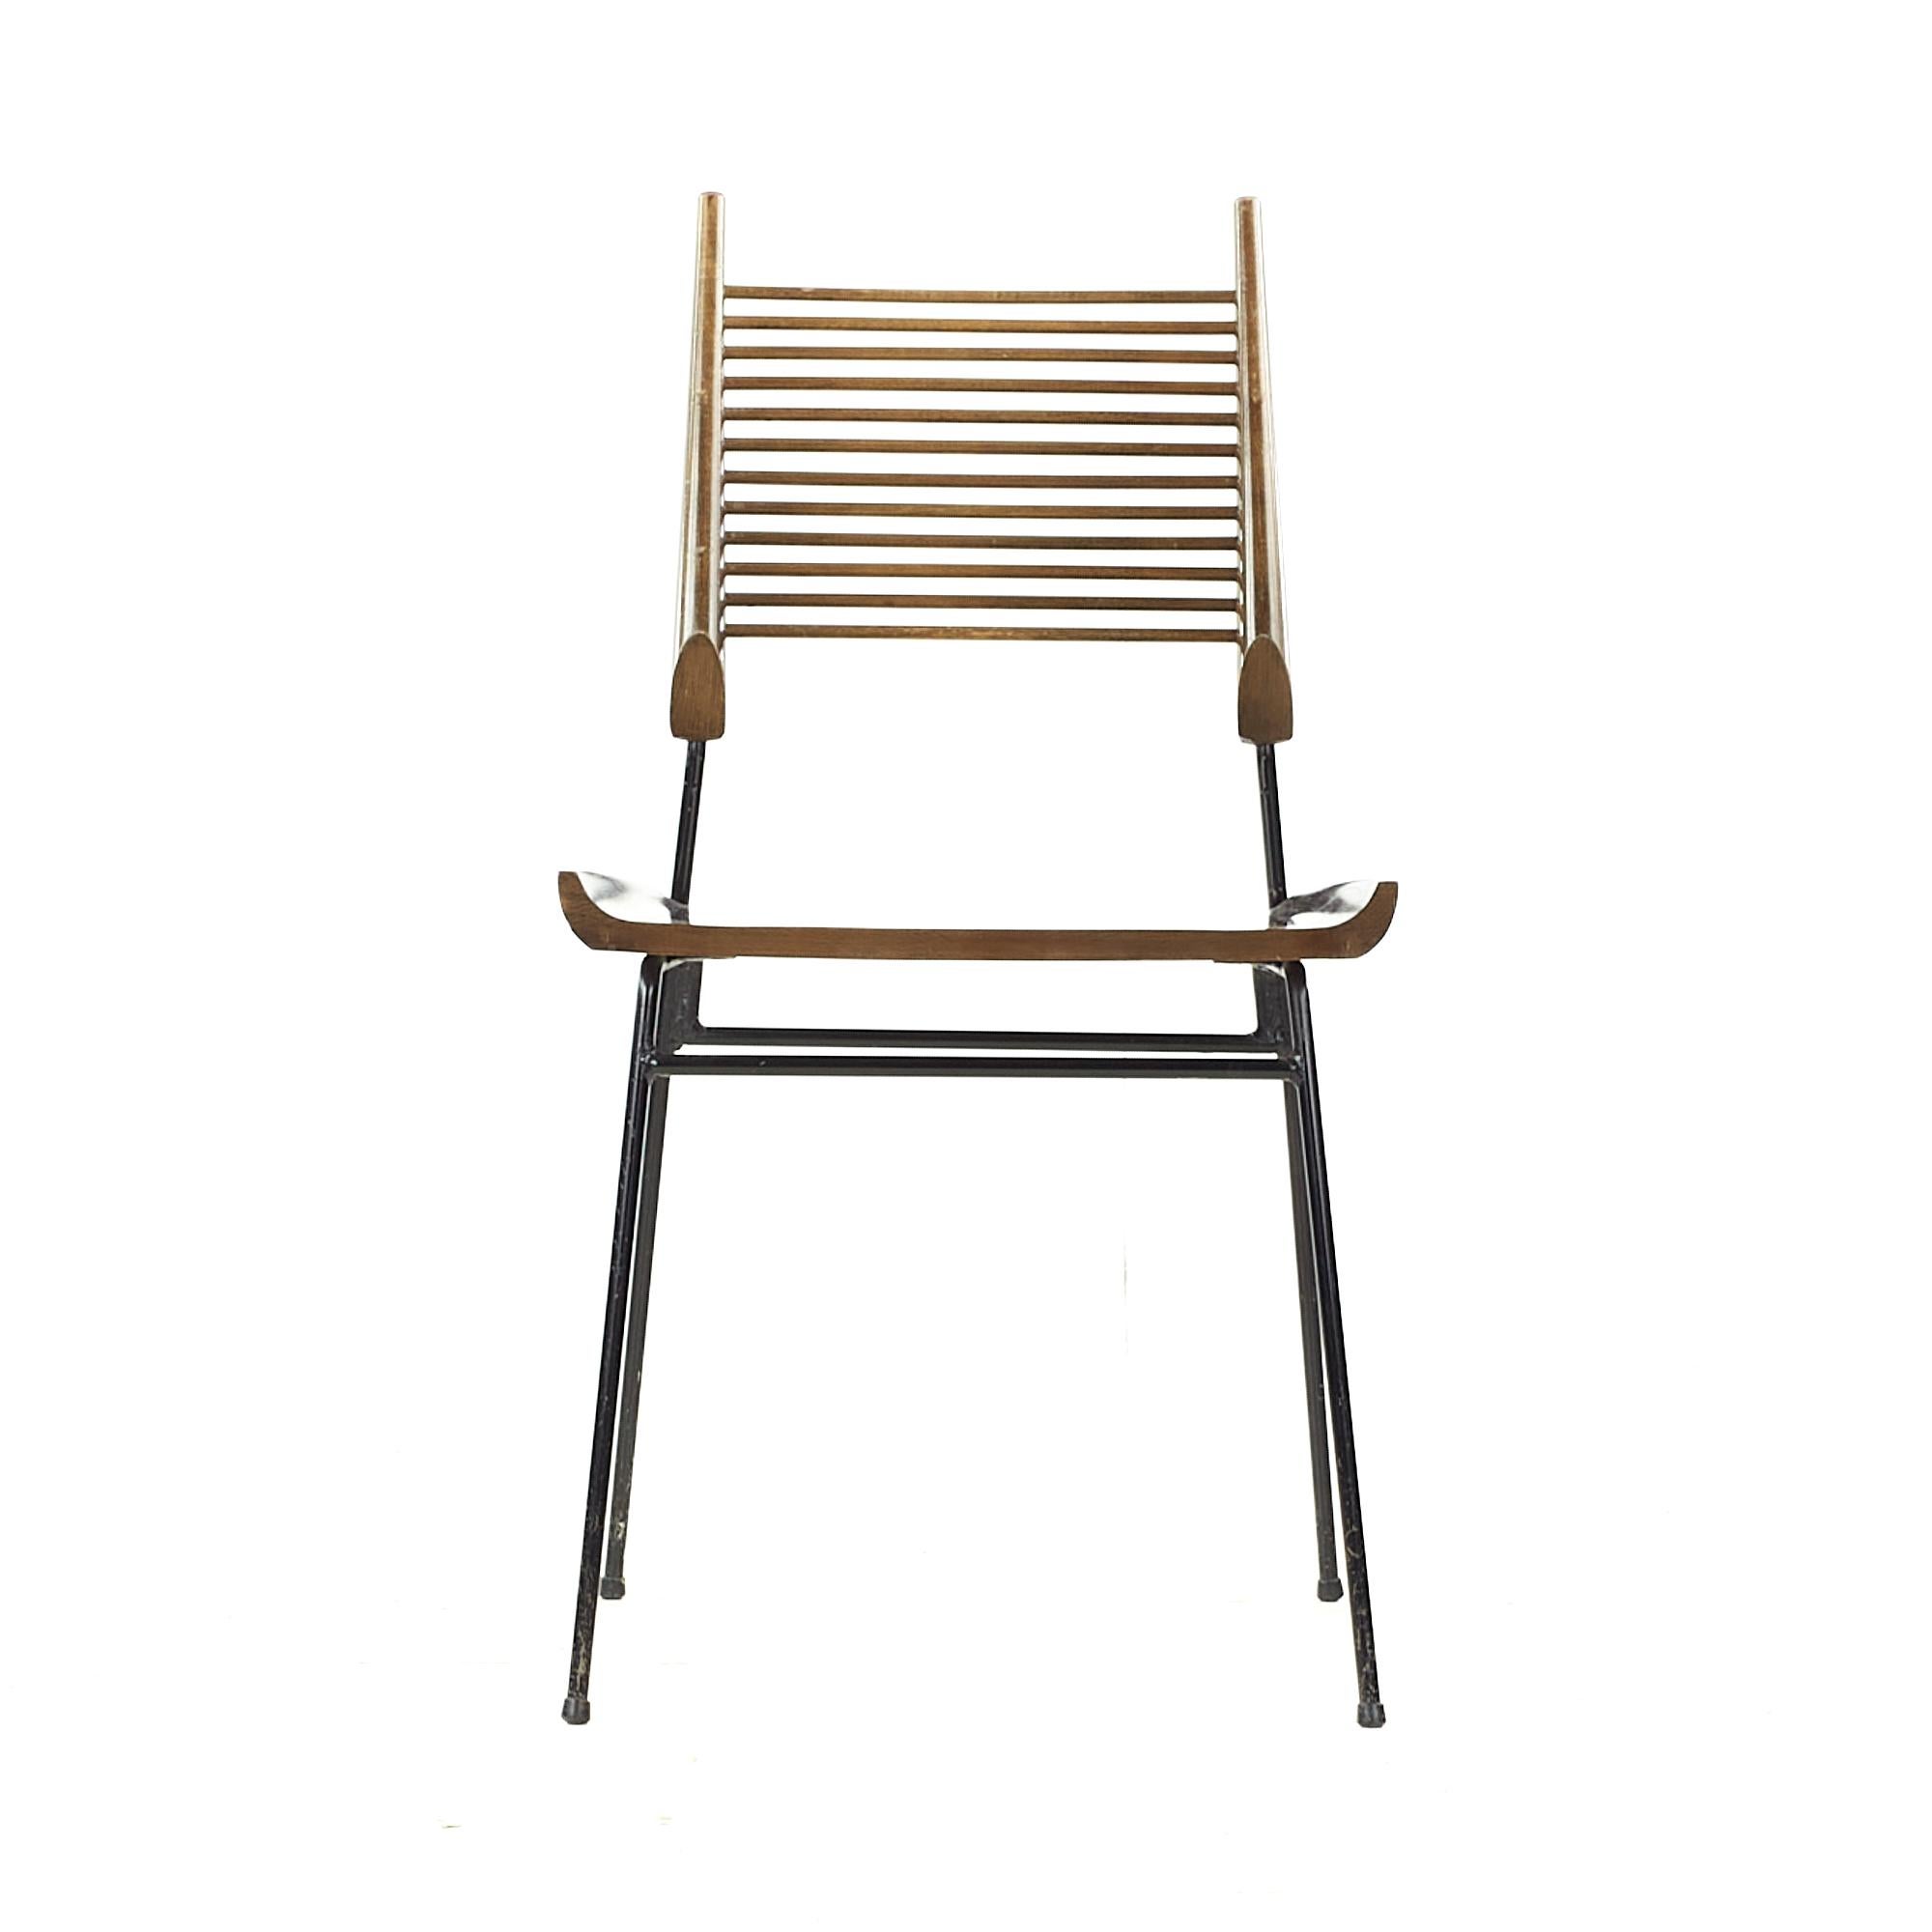 Paul McCobb for Winchendon midcentury maple and iron shovel chair model 1533

This chair measures: 18.25 wide x 21 deep x 33.75 inches high, with a seat height/chair clearance of 17.5 inches

All pieces of furniture can be had in what we call